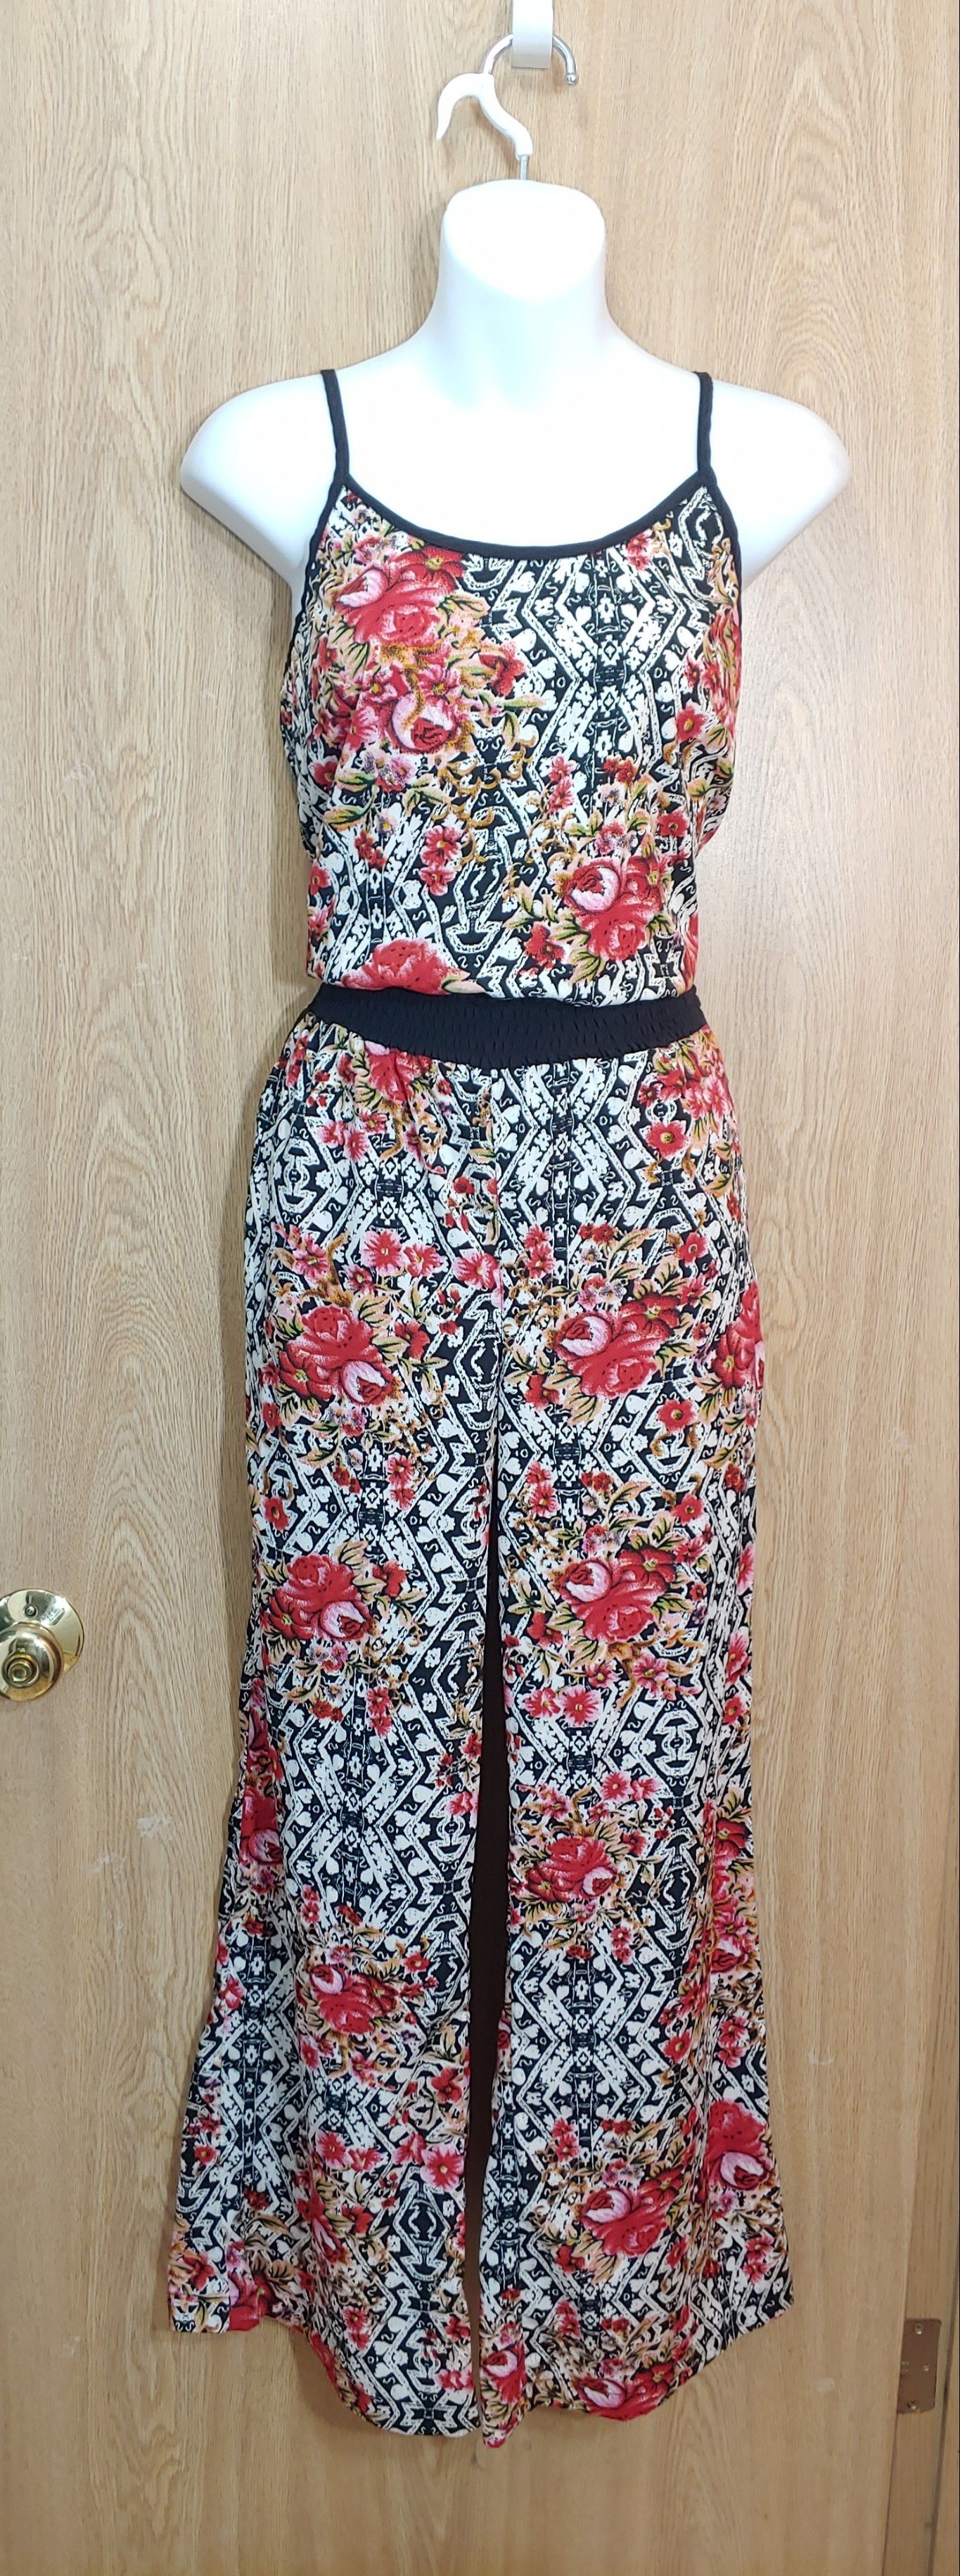 S-Red & black floral patterned jumpsuit with adjustable spaghetti straps & pockets